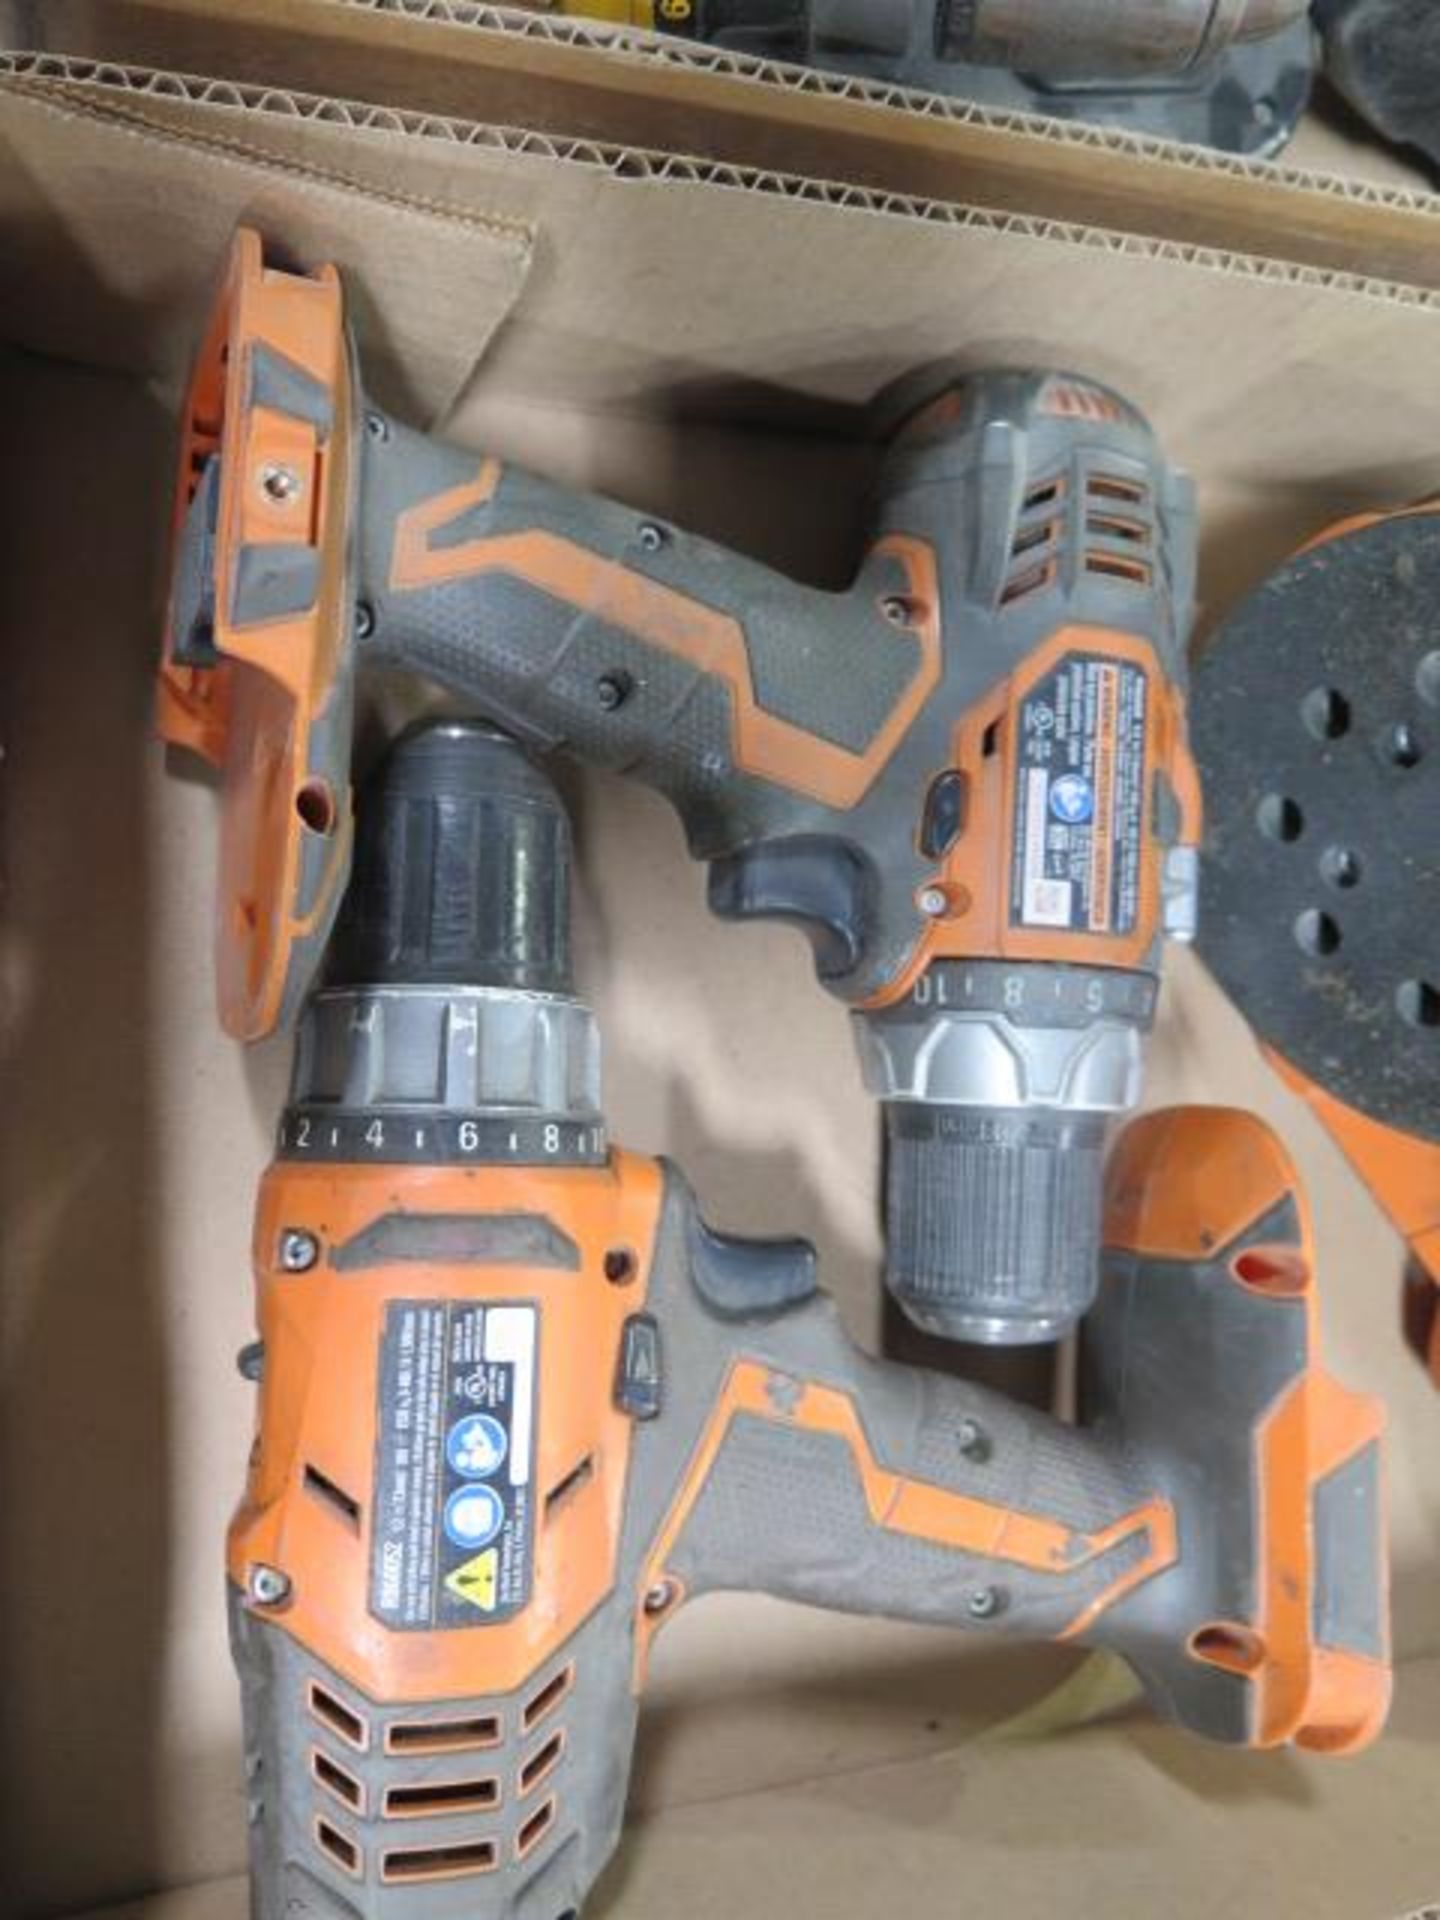 Ridgid Cordless Drills (2) and Cordless Orbital Sander (SOLD AS-IS - NO WARRANTY) - Image 3 of 5